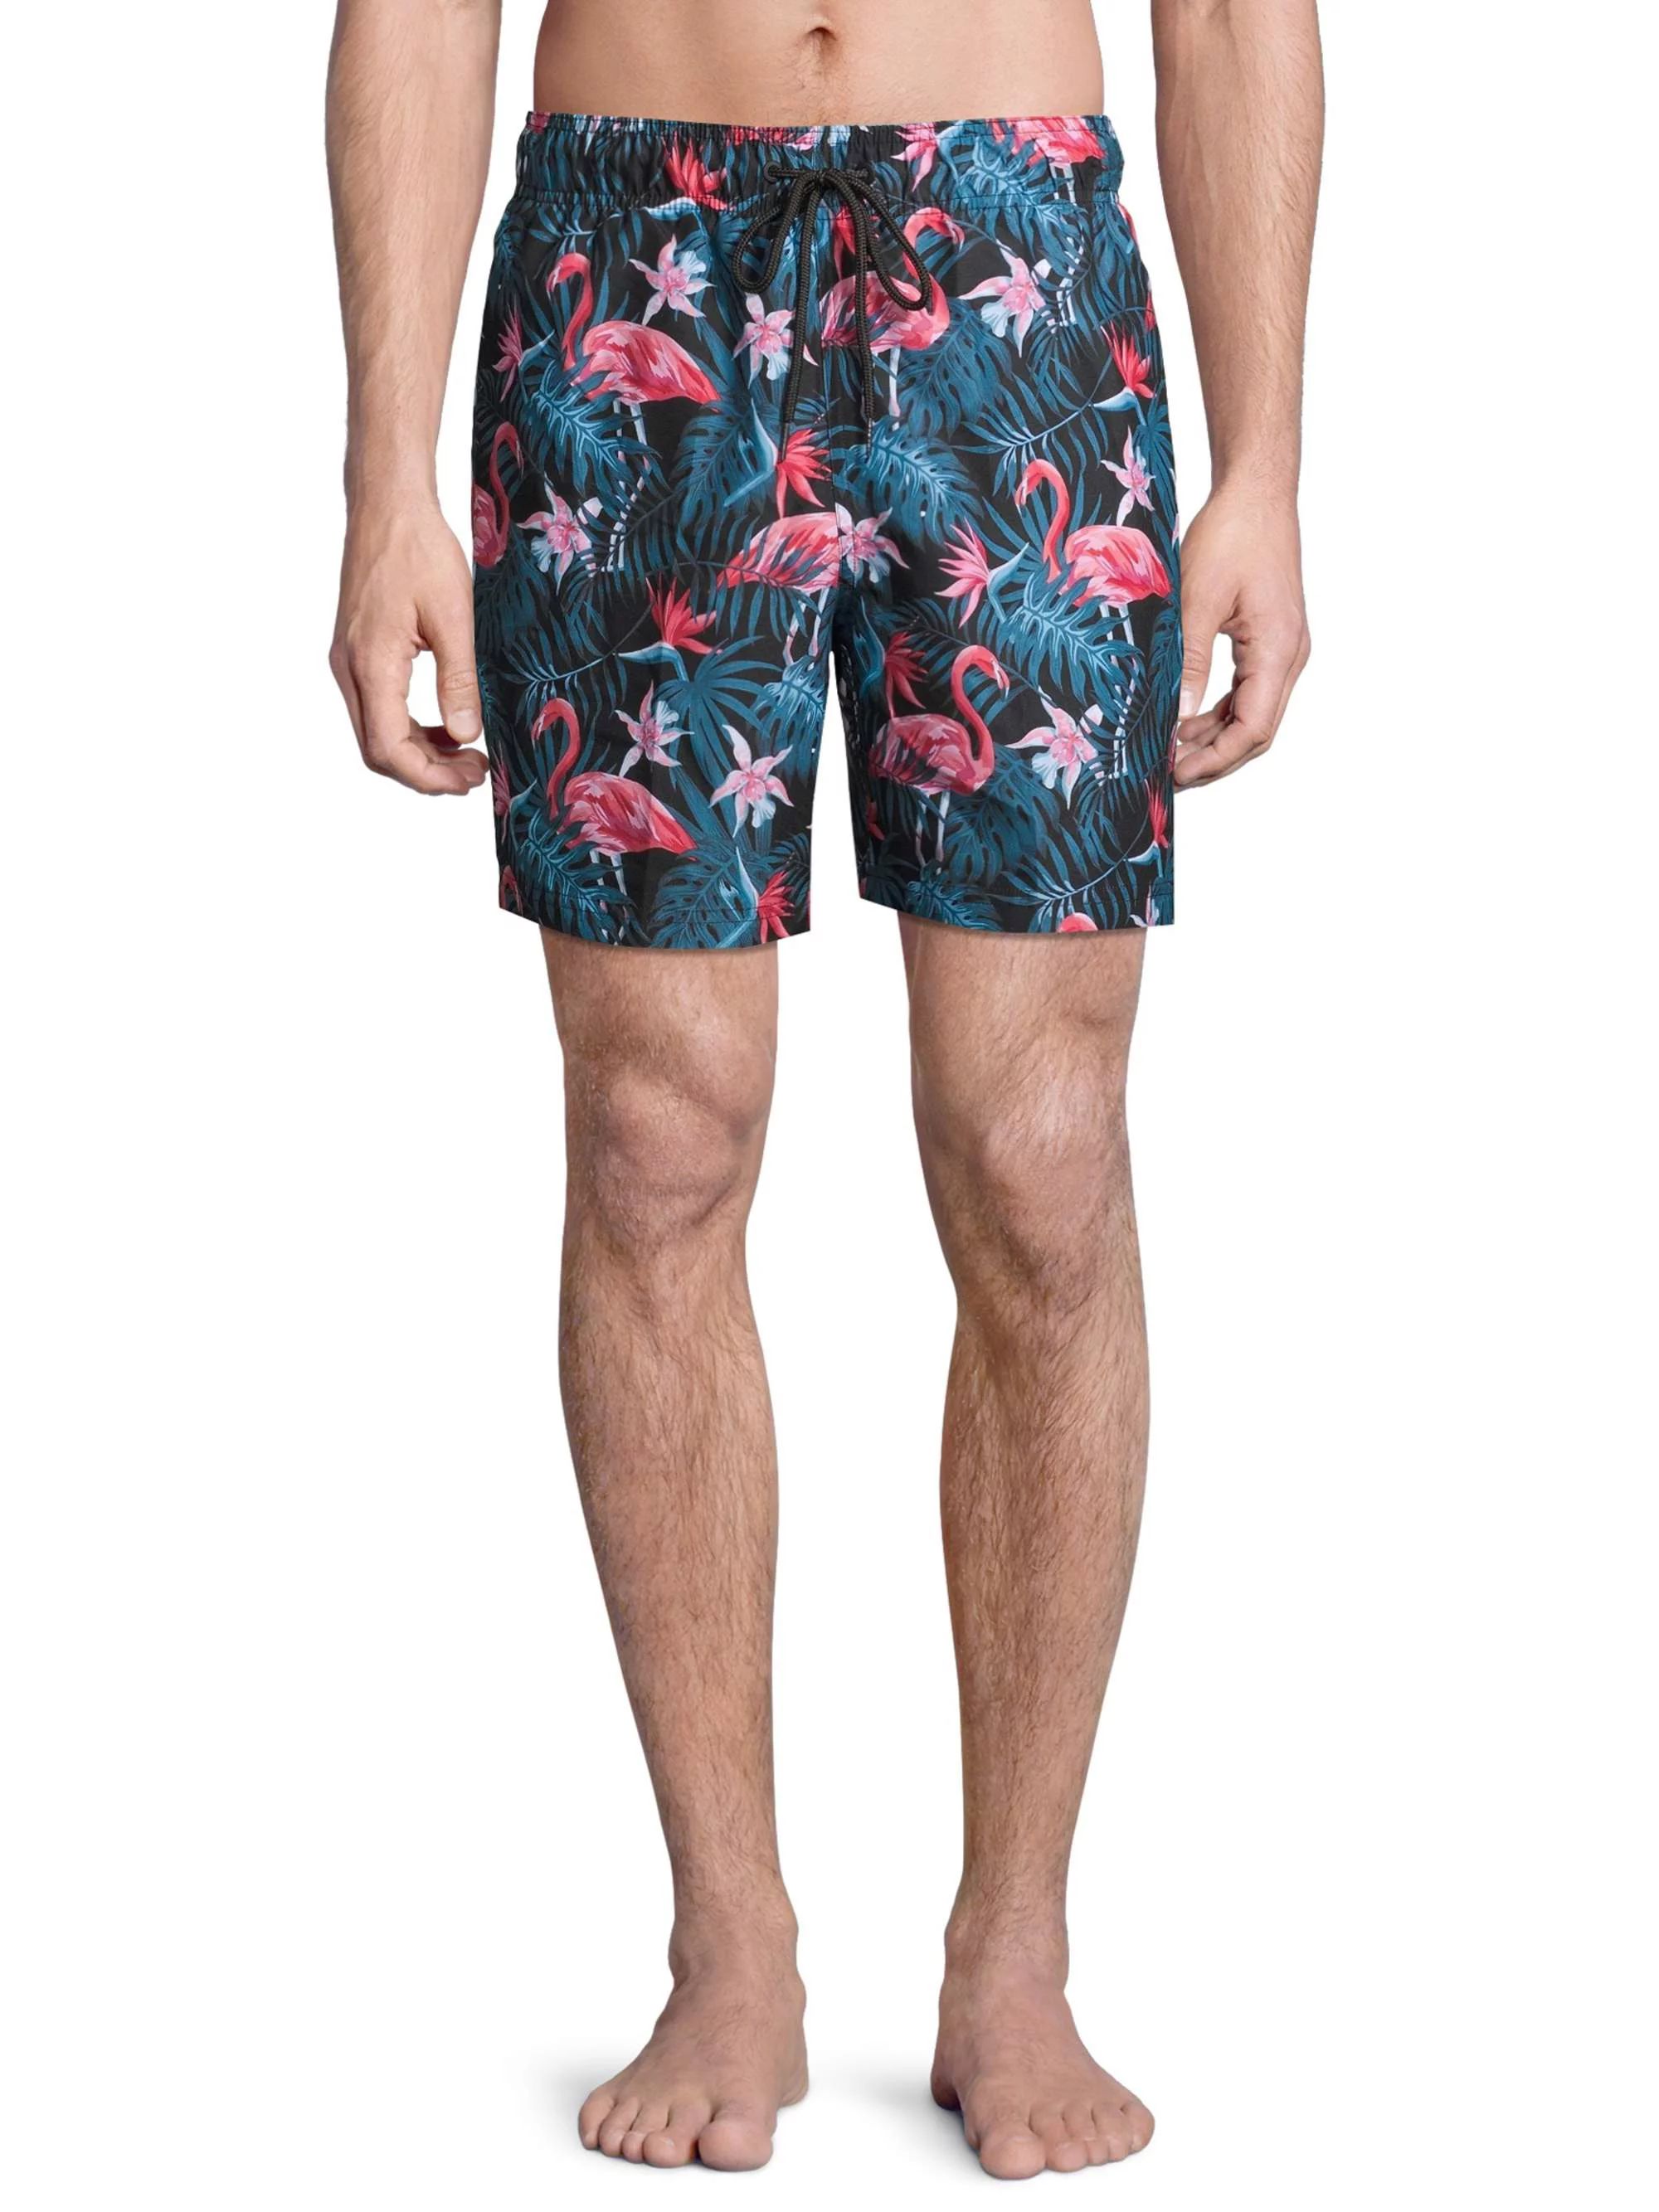 George Men's and Big Men's 6" Novelty Swim Trunk with Flamingos, up to Size 3XL | Walmart (US)